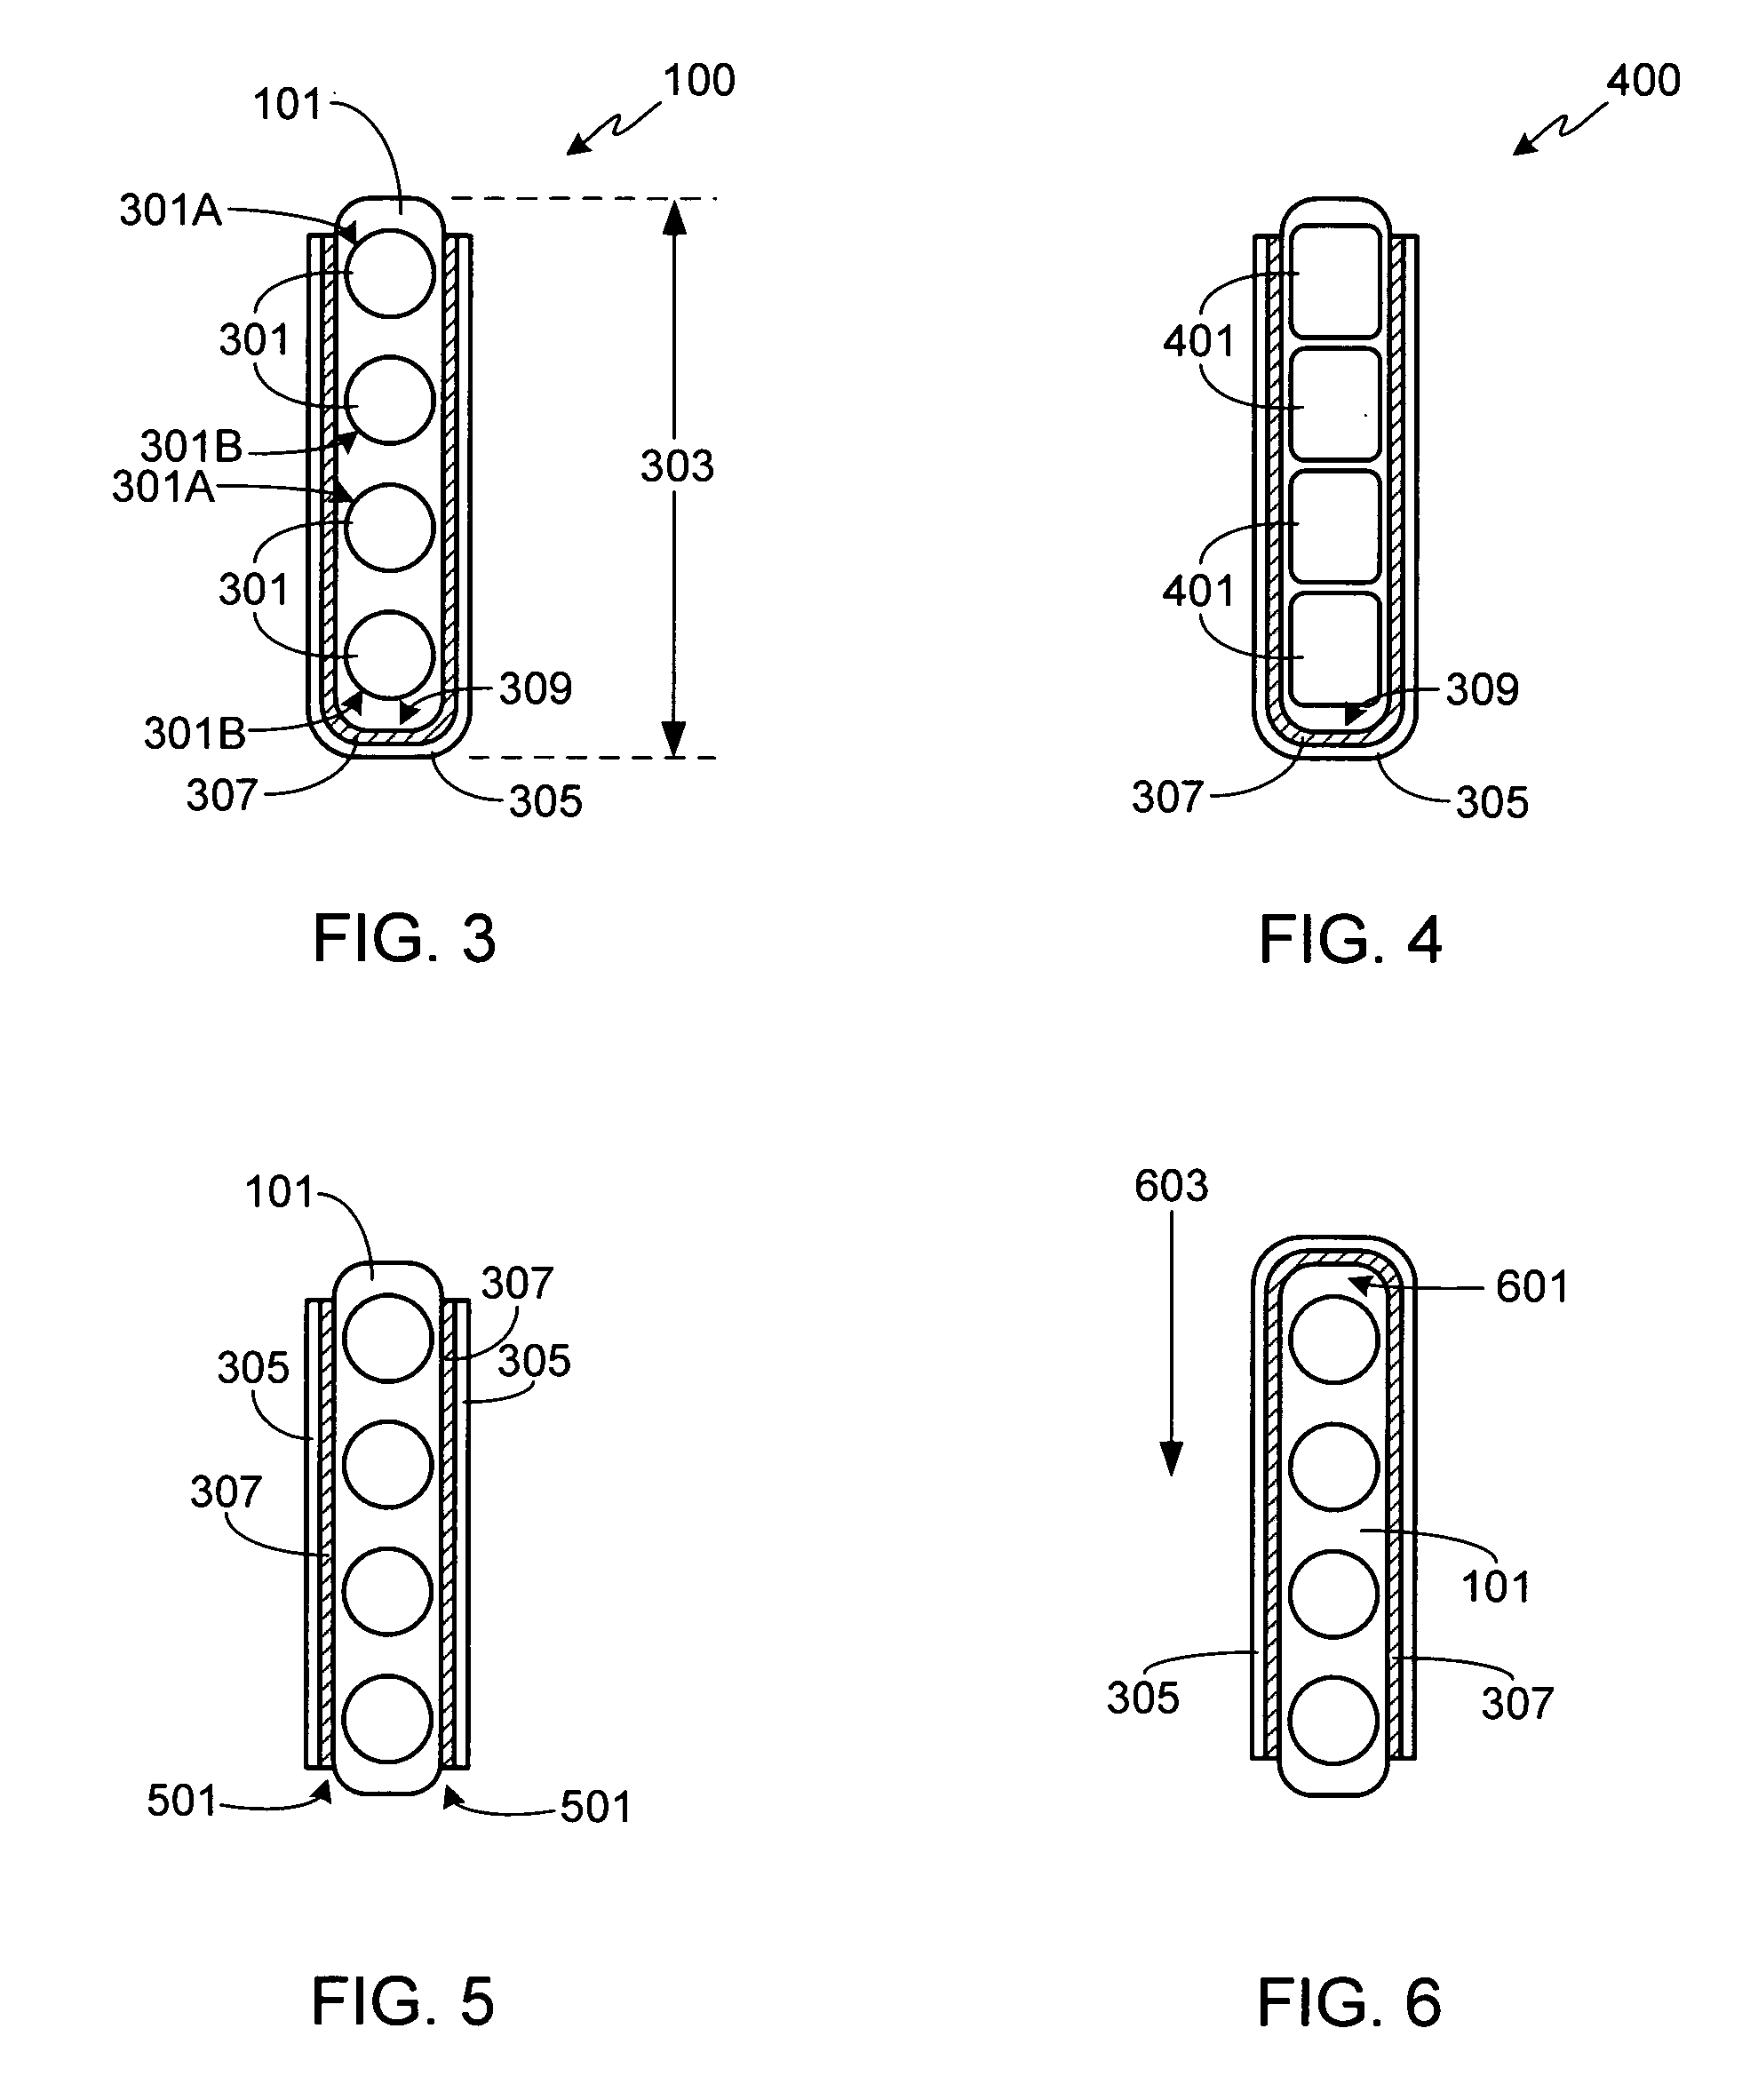 Liquid cooling manifold with multi-function thermal interface